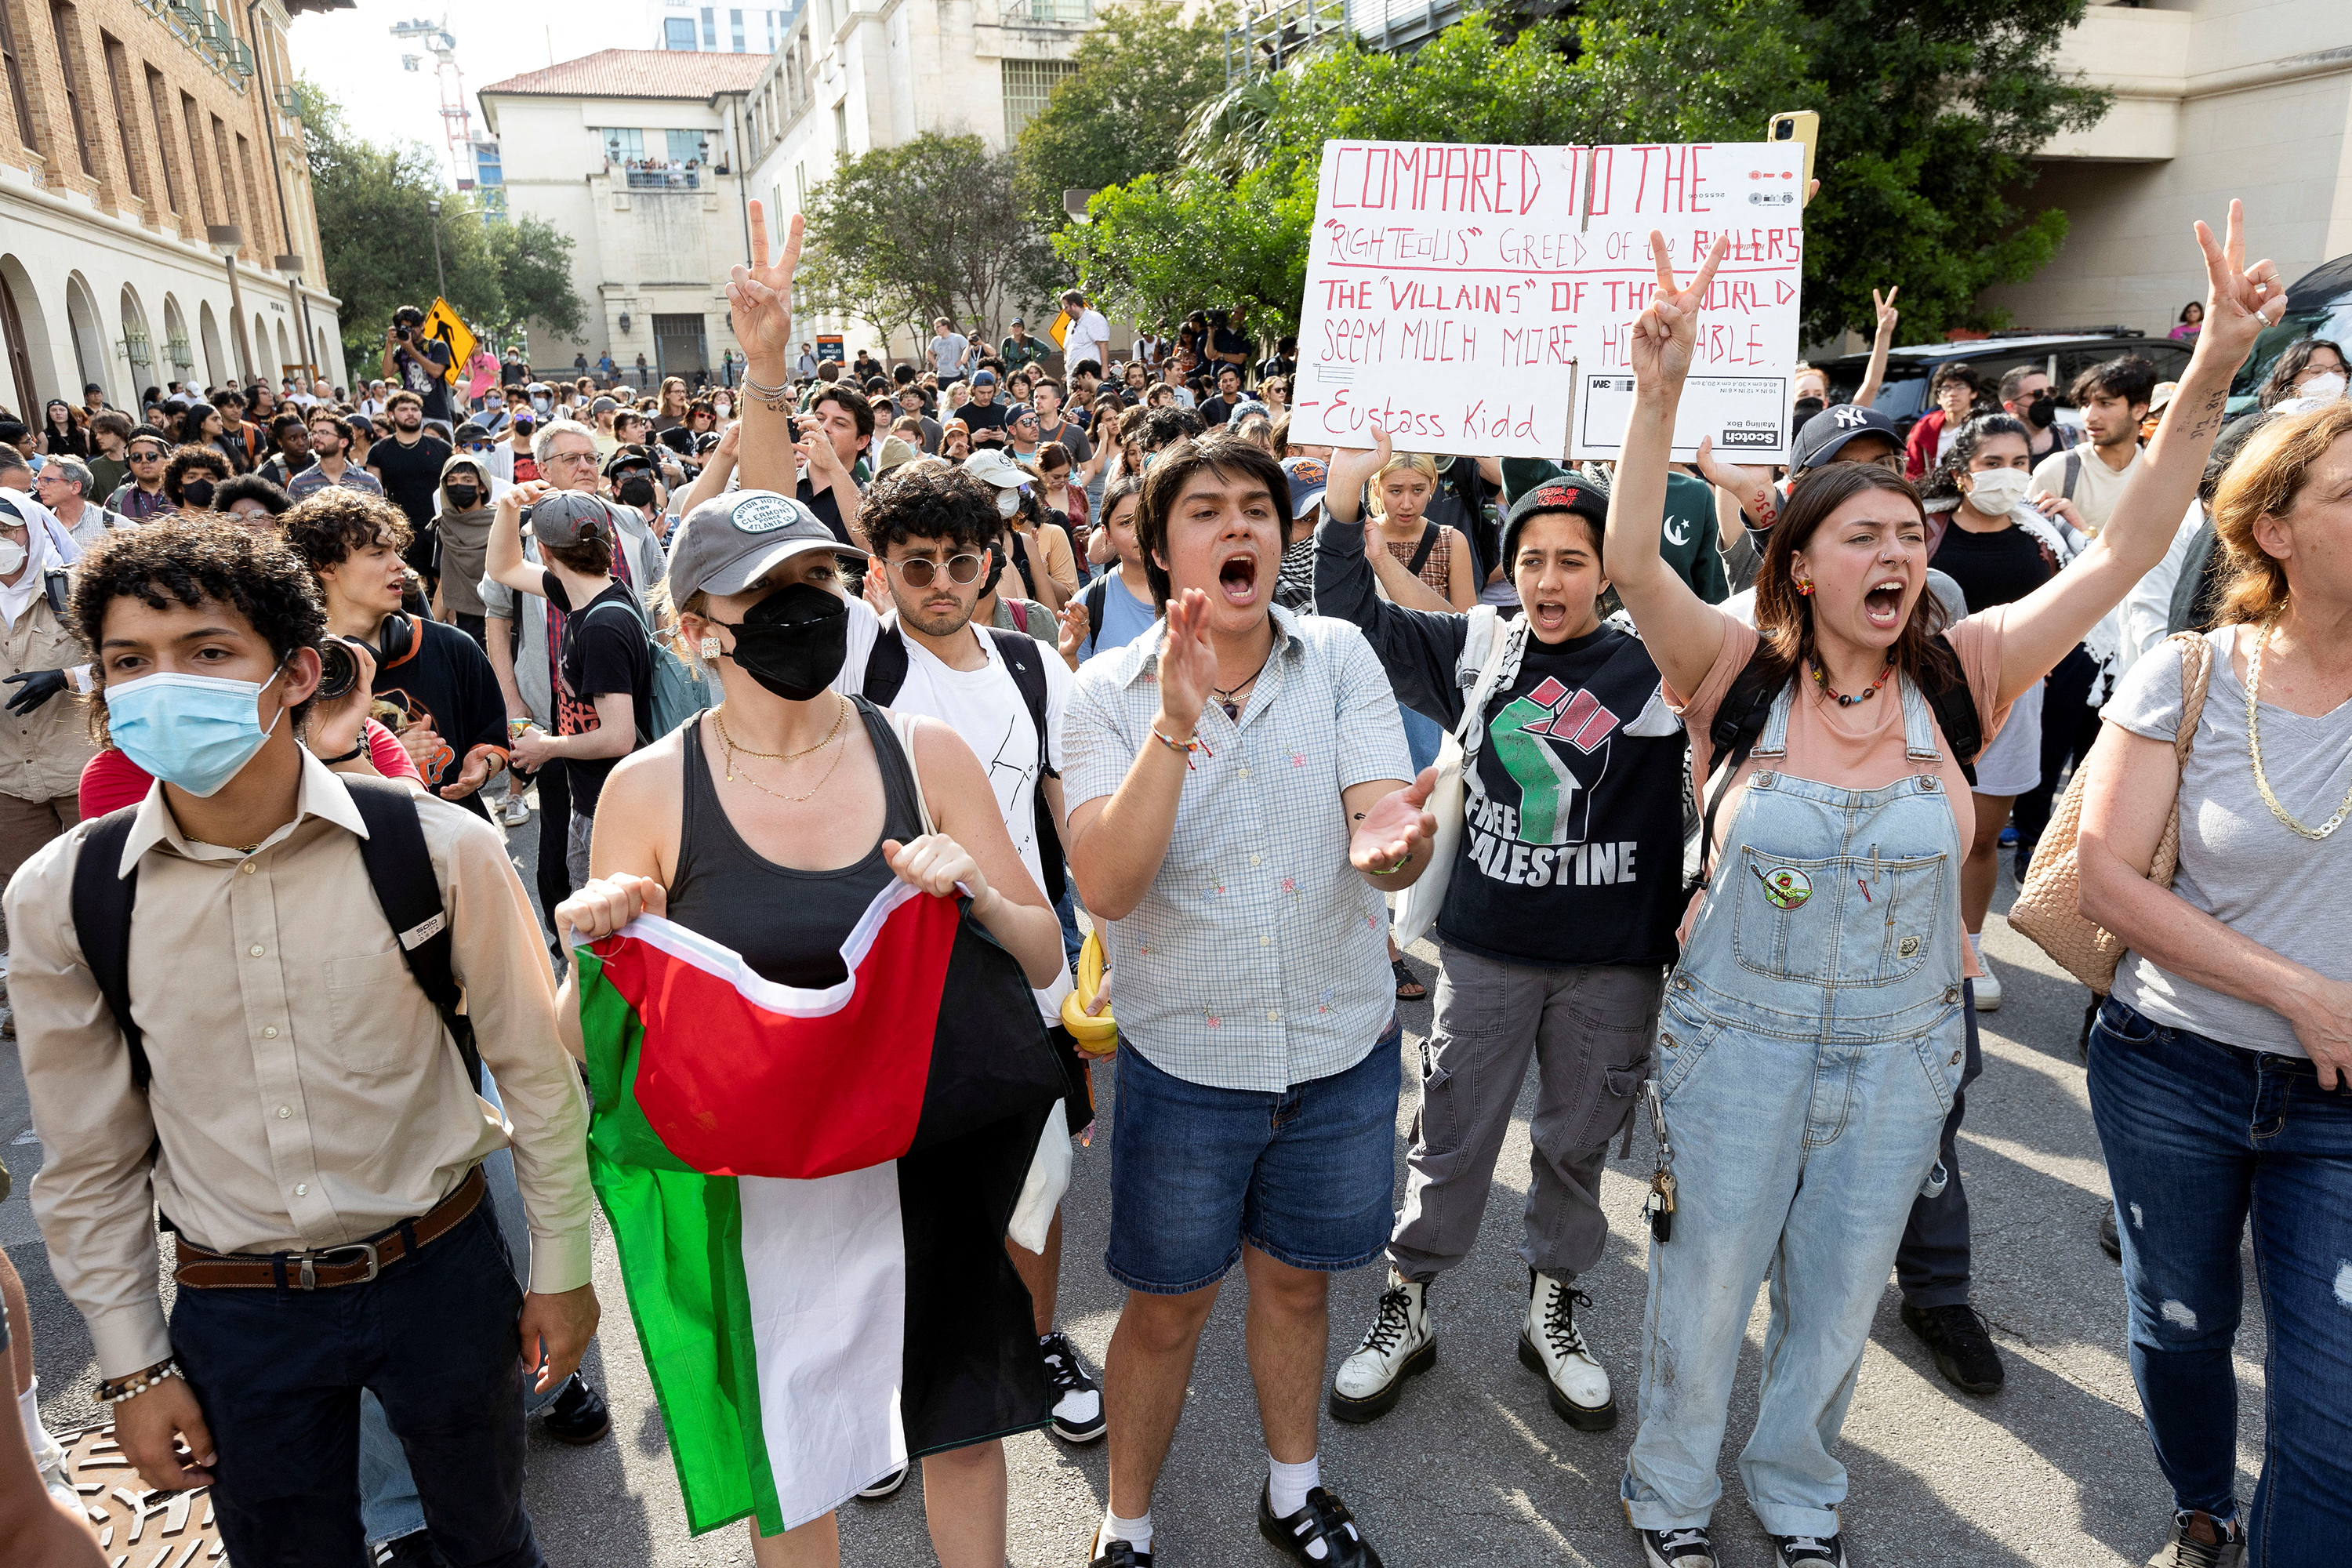 Pro-Palestinian protesters demonstrate at the University of Texas on April 24, in Austin, Texas.